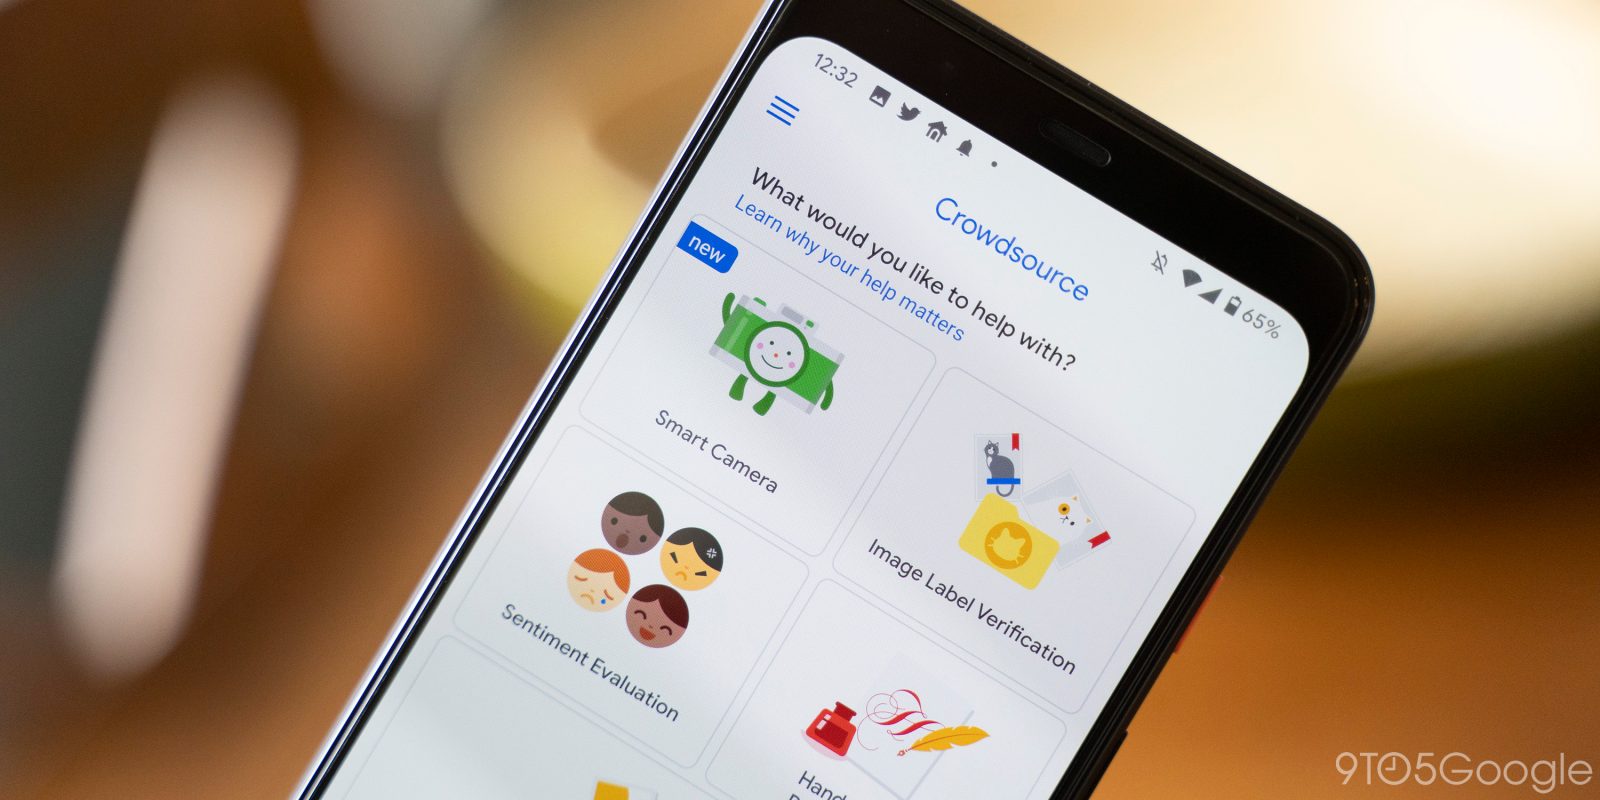 Google Crowdsource leaderboard debuts w/ new features 9to5Google